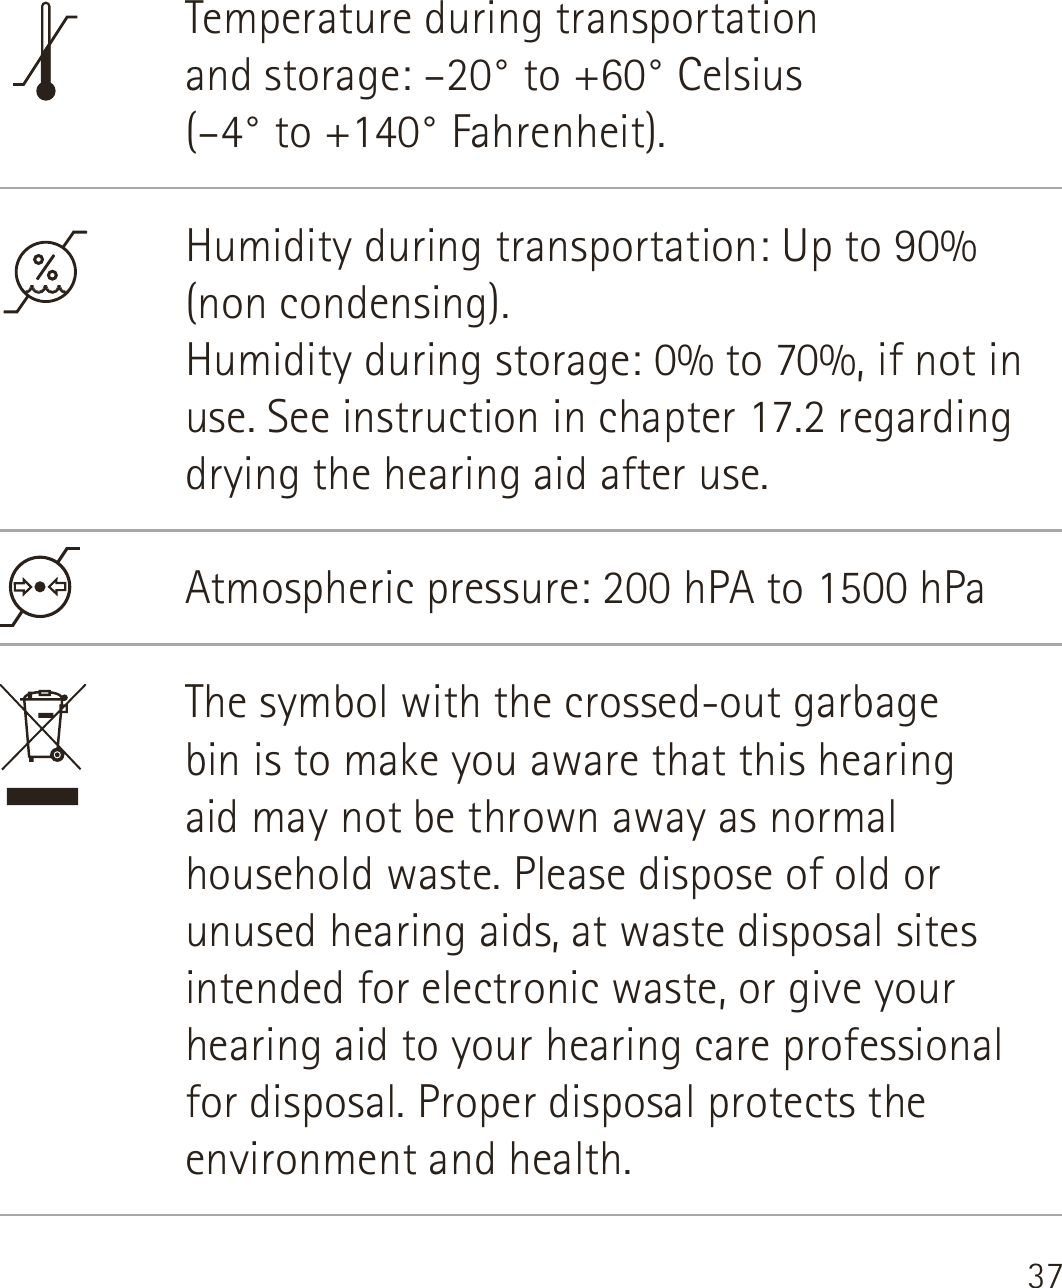 37Temperature during transportation  and storage: –20° to +60° Celsius  (–4° to +140° Fahrenheit).Humidity during transportation: Up to 90% (non condensing). Humidity during storage: 0% to 70%, if not in use. See instruction in chapter 17.2 regarding drying the hearing aid after use. Atmospheric pressure: 200 hPA to 1500 hPaThe symbol with the crossed-out garbage  bin is to make you aware that this hearing  aid may not be thrown away as normal household waste. Please dispose of old or unused hearing aids, at waste disposal sites intended for electronic waste, or give your hearing aid to your hearing care professional for disposal. Proper disposal protects the environment and health.